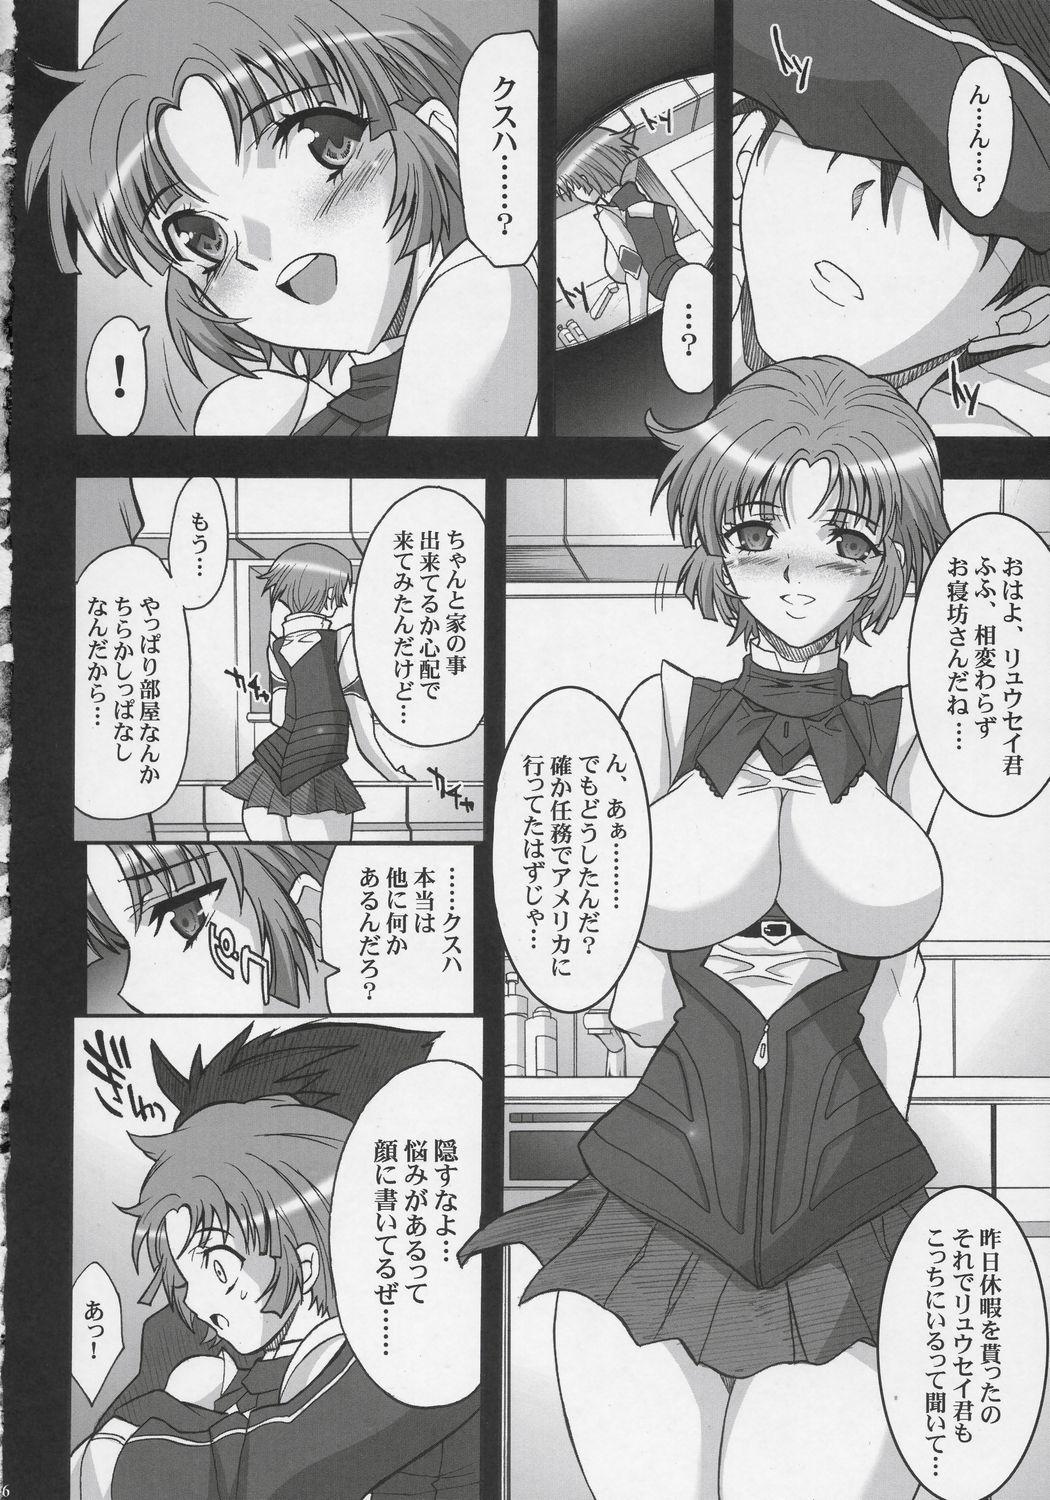 Amatuer STEEL HEROINES Vol. 3 - Super robot wars Shemale - Page 5